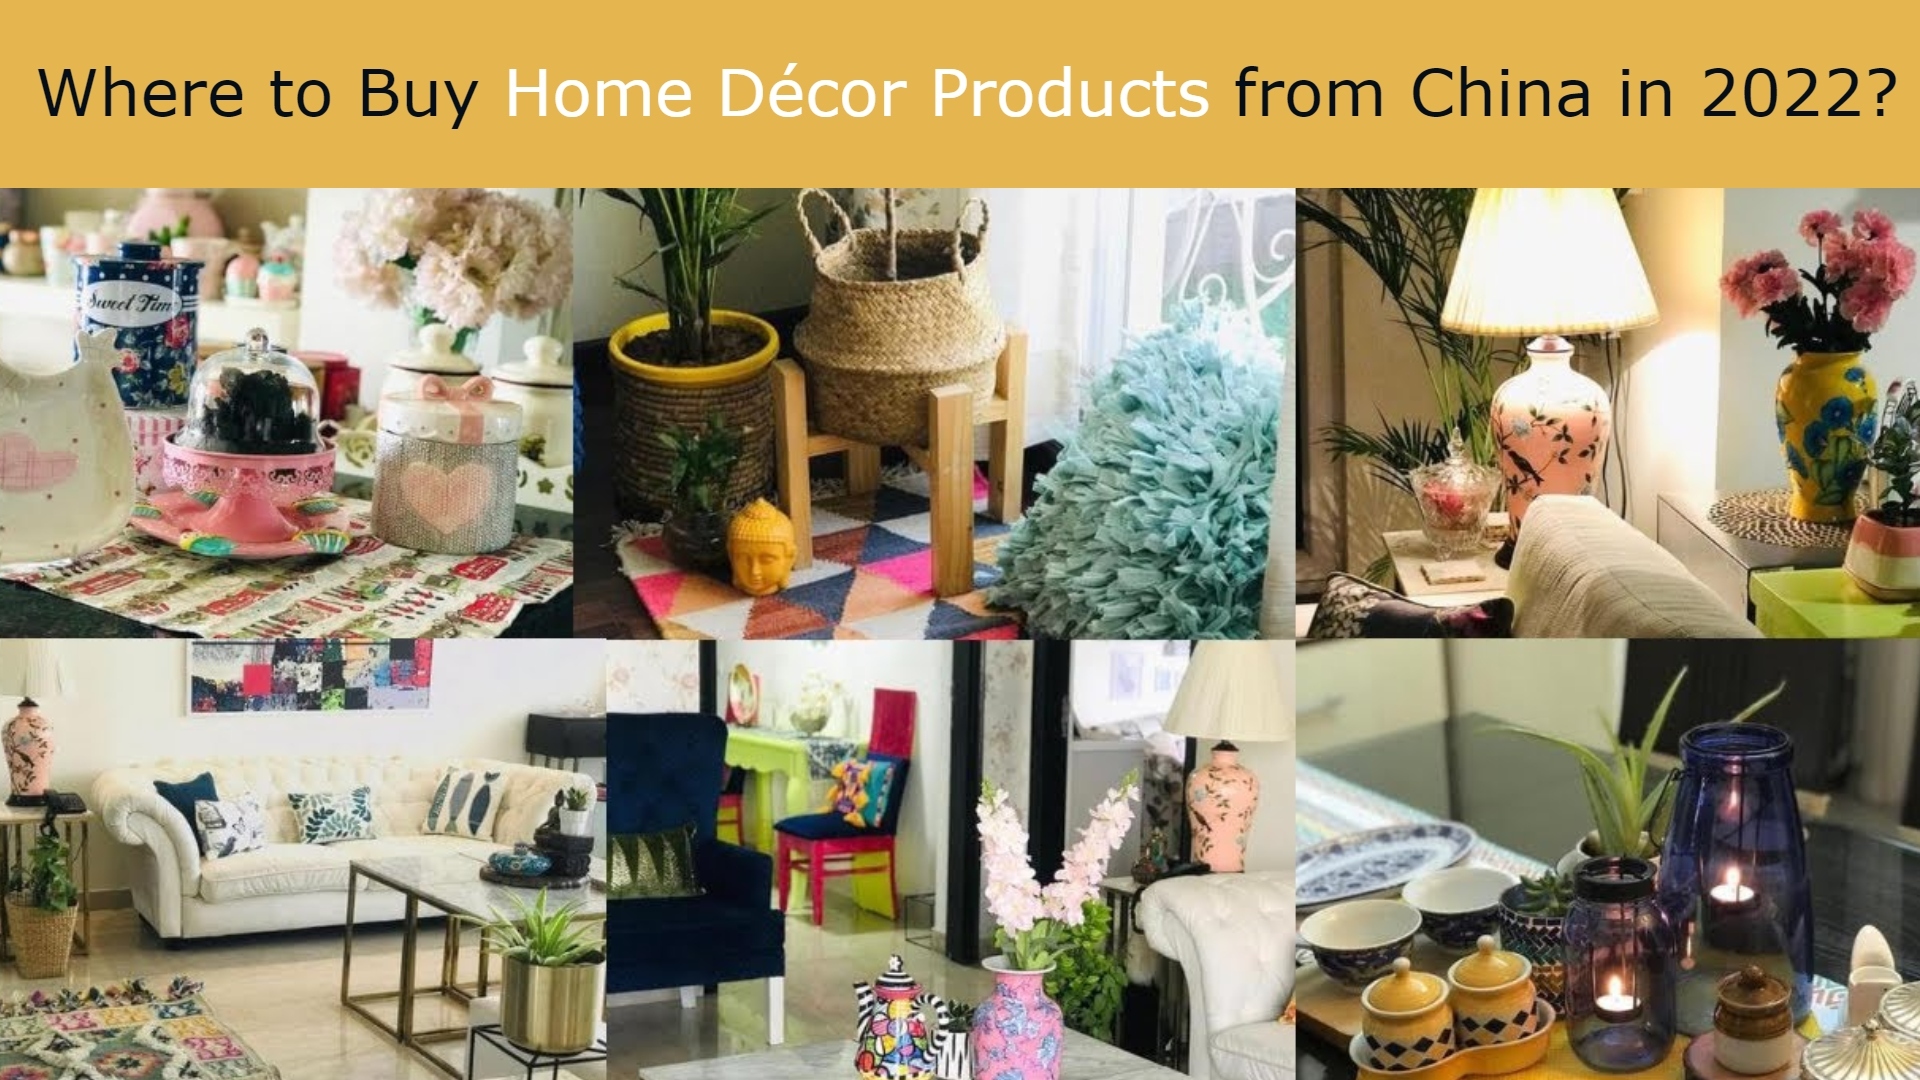 Where to Buy Home Décor Products from China